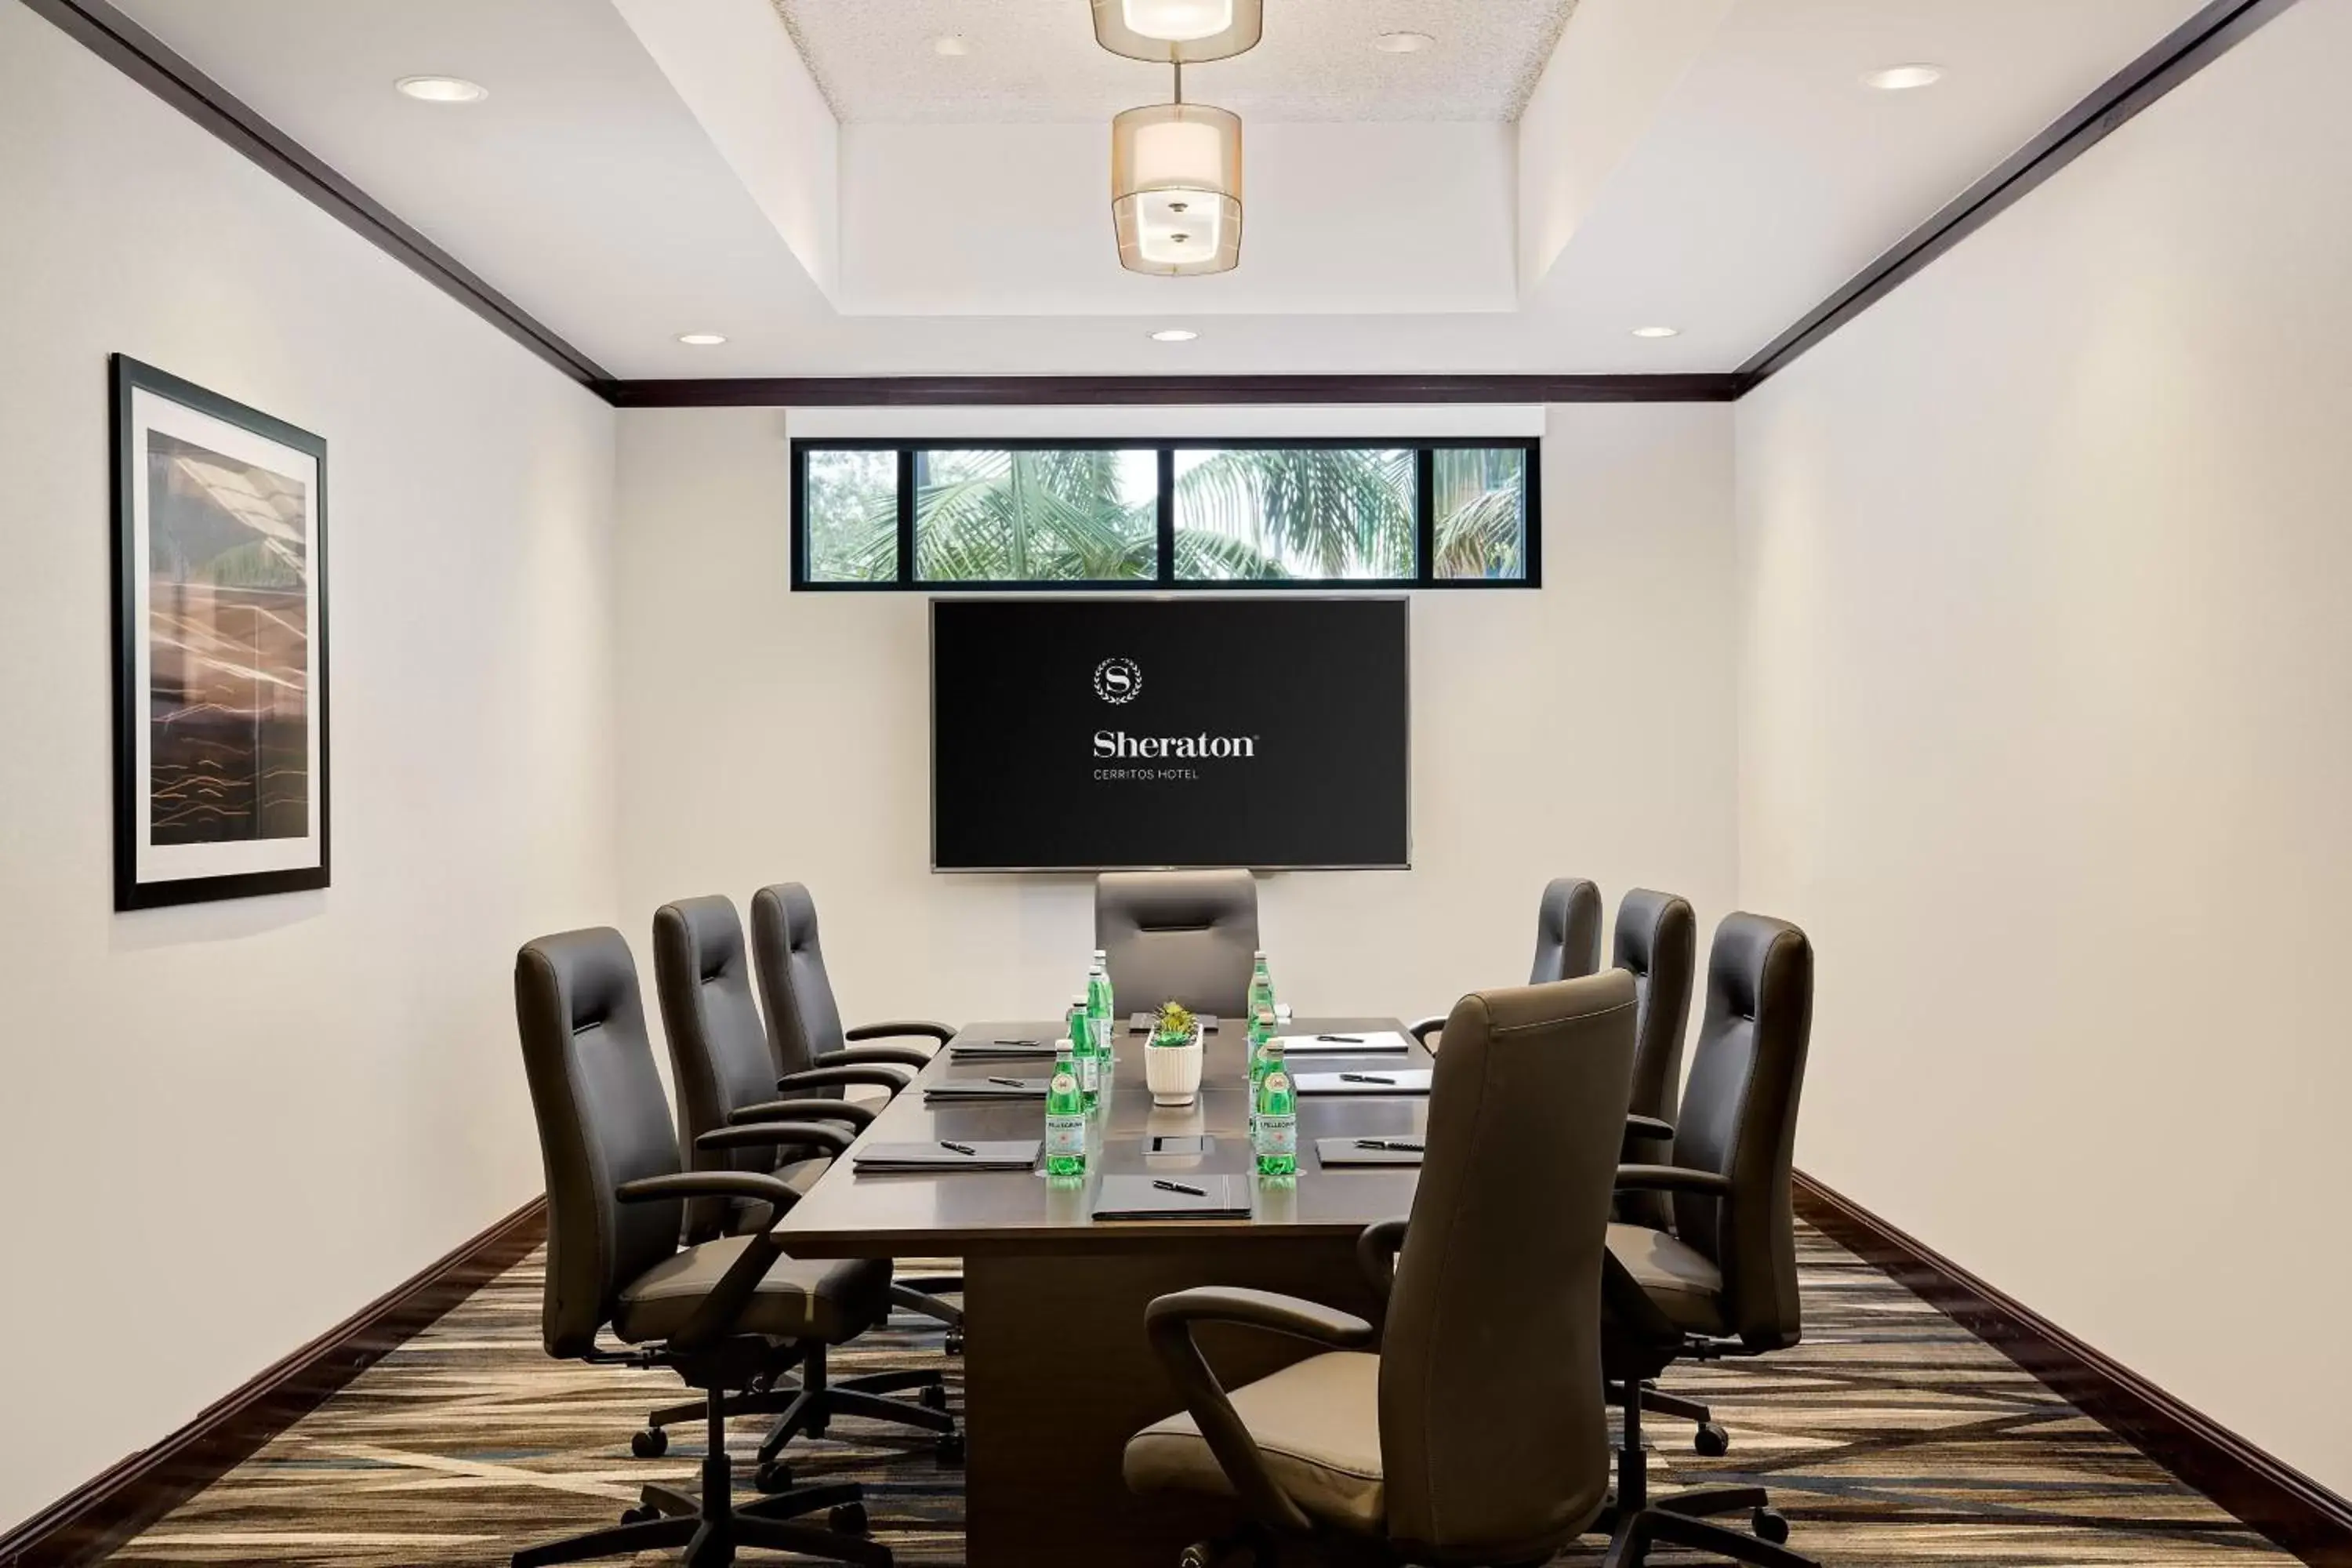 Meeting/conference room in Sheraton Cerritos